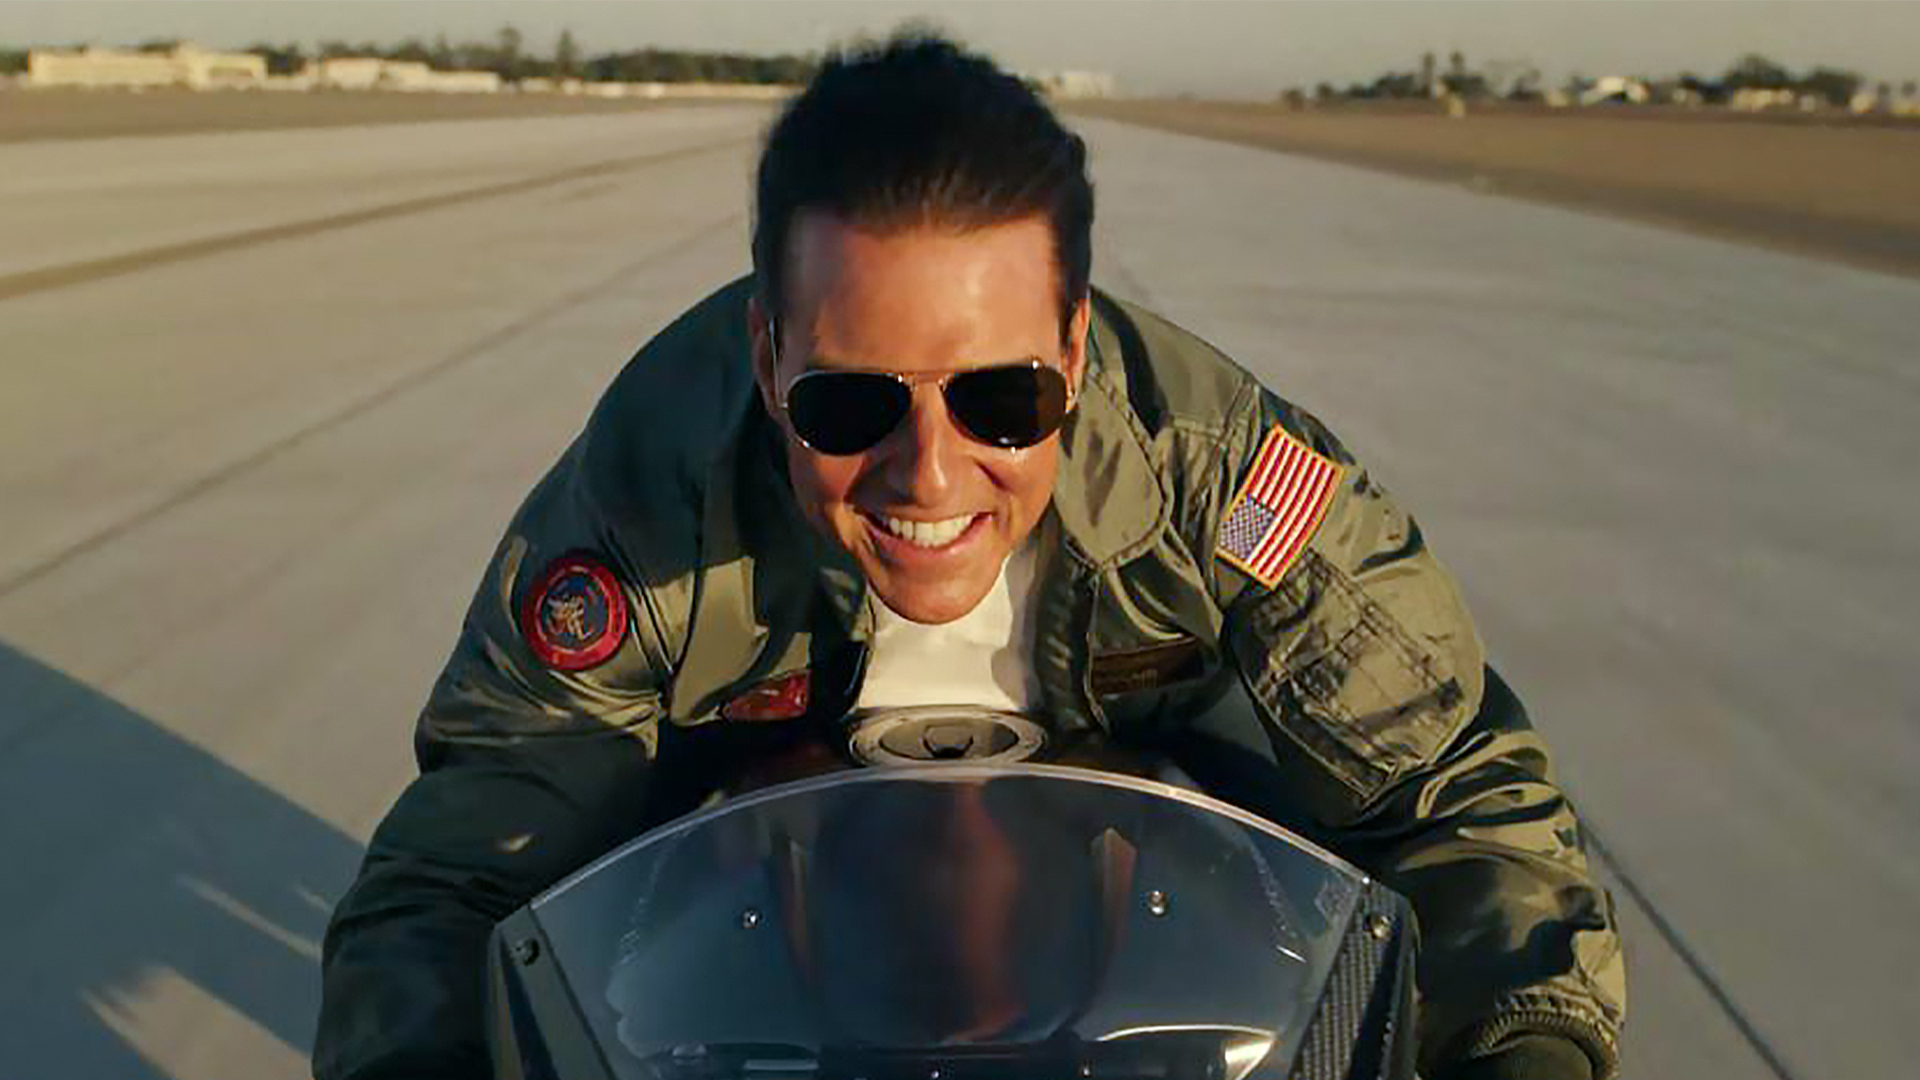 Top Gun: Maverick Review: Tom Cruise Soars in an Action Sequel for the Ages 